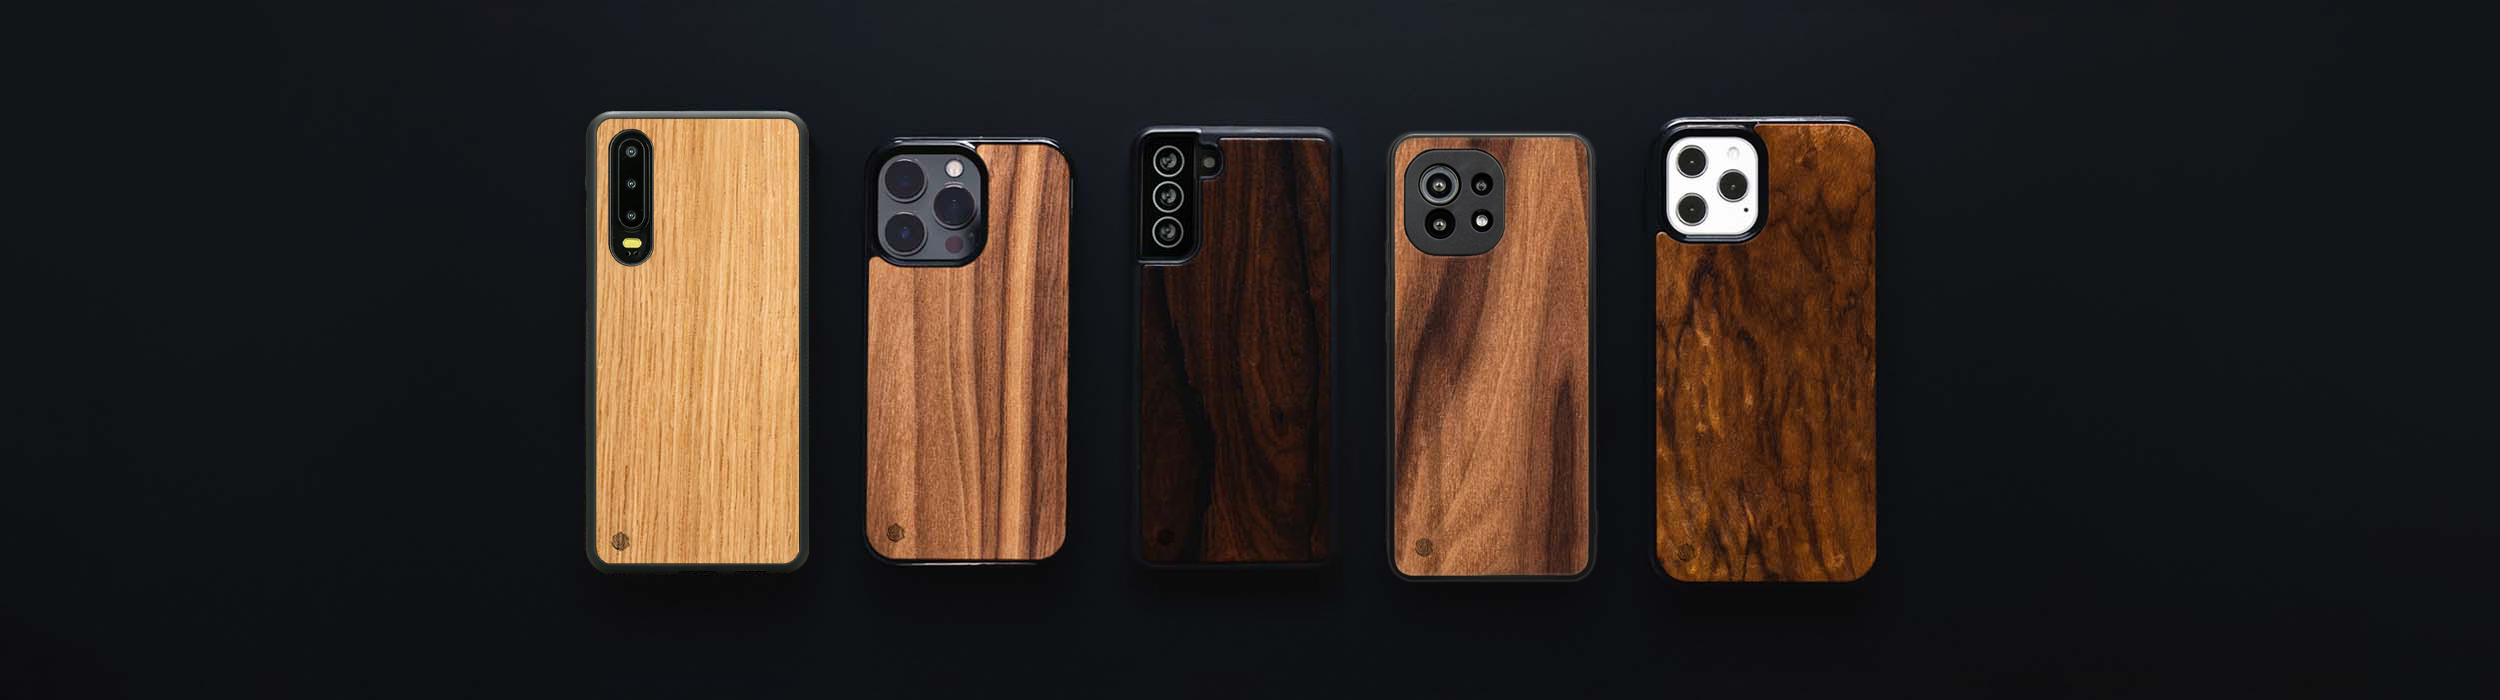 Huawei P30 lite Wooden Phone Cases